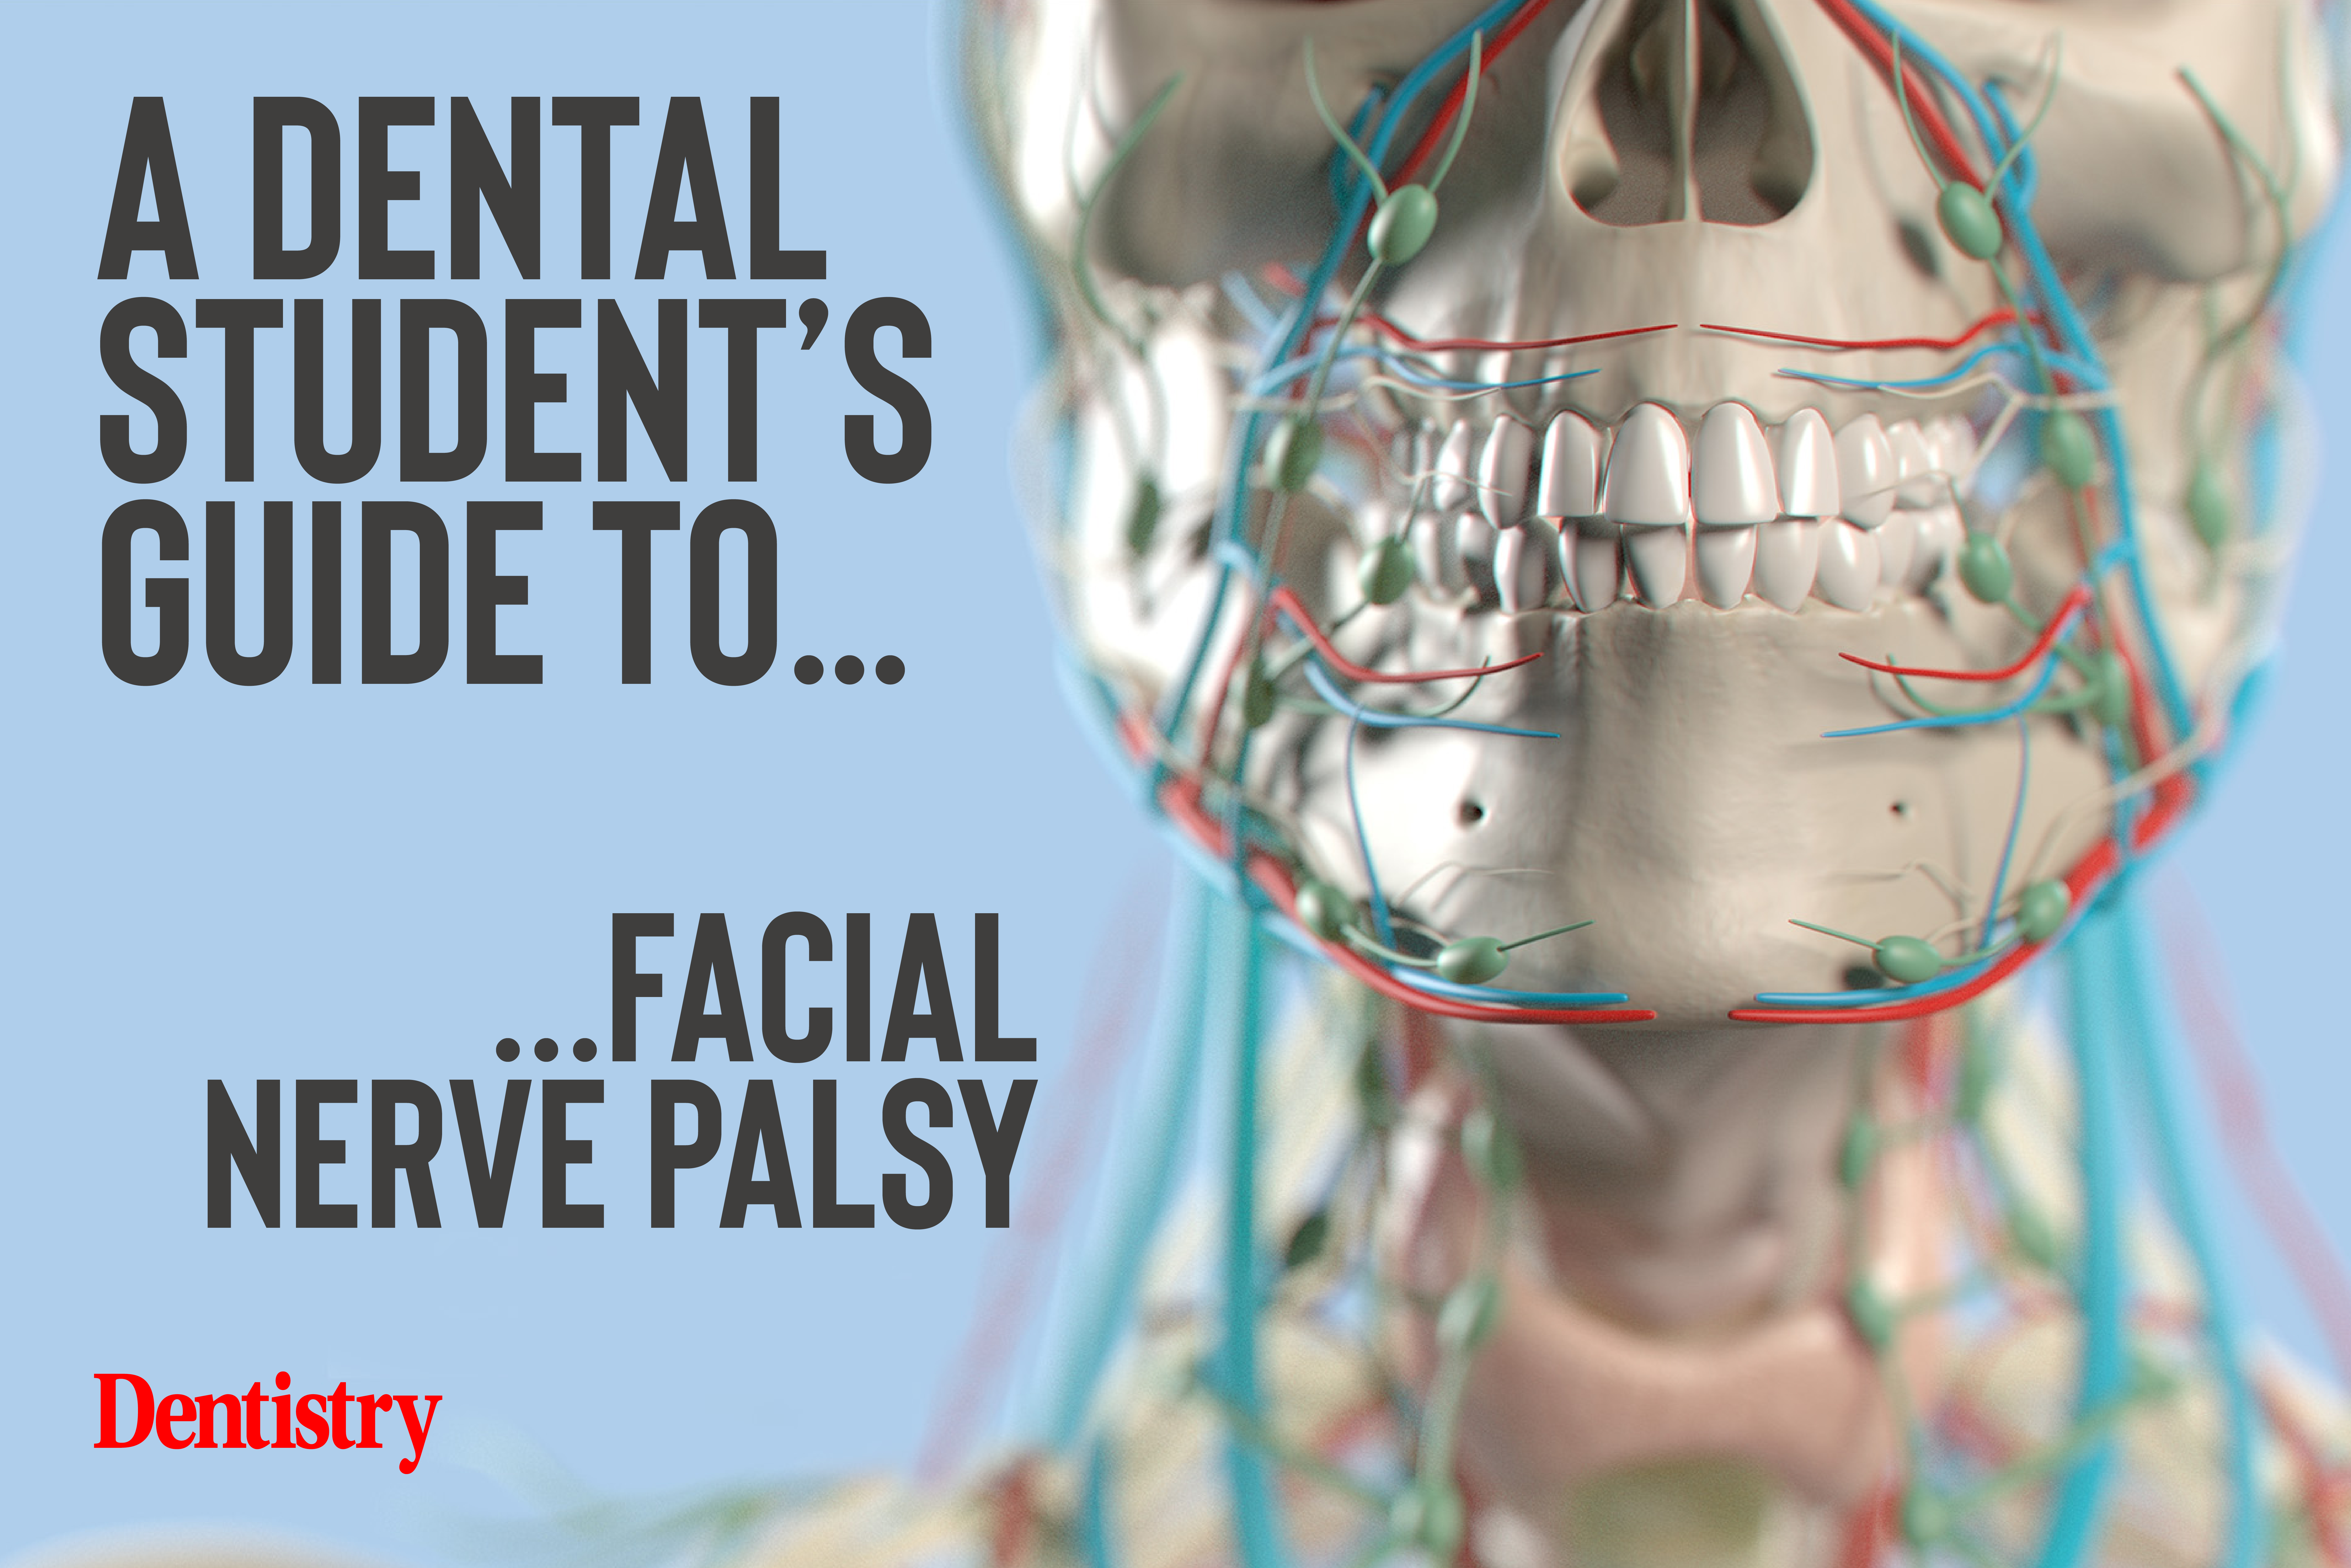 dental student's guide to facial nerve palsy hannah hook